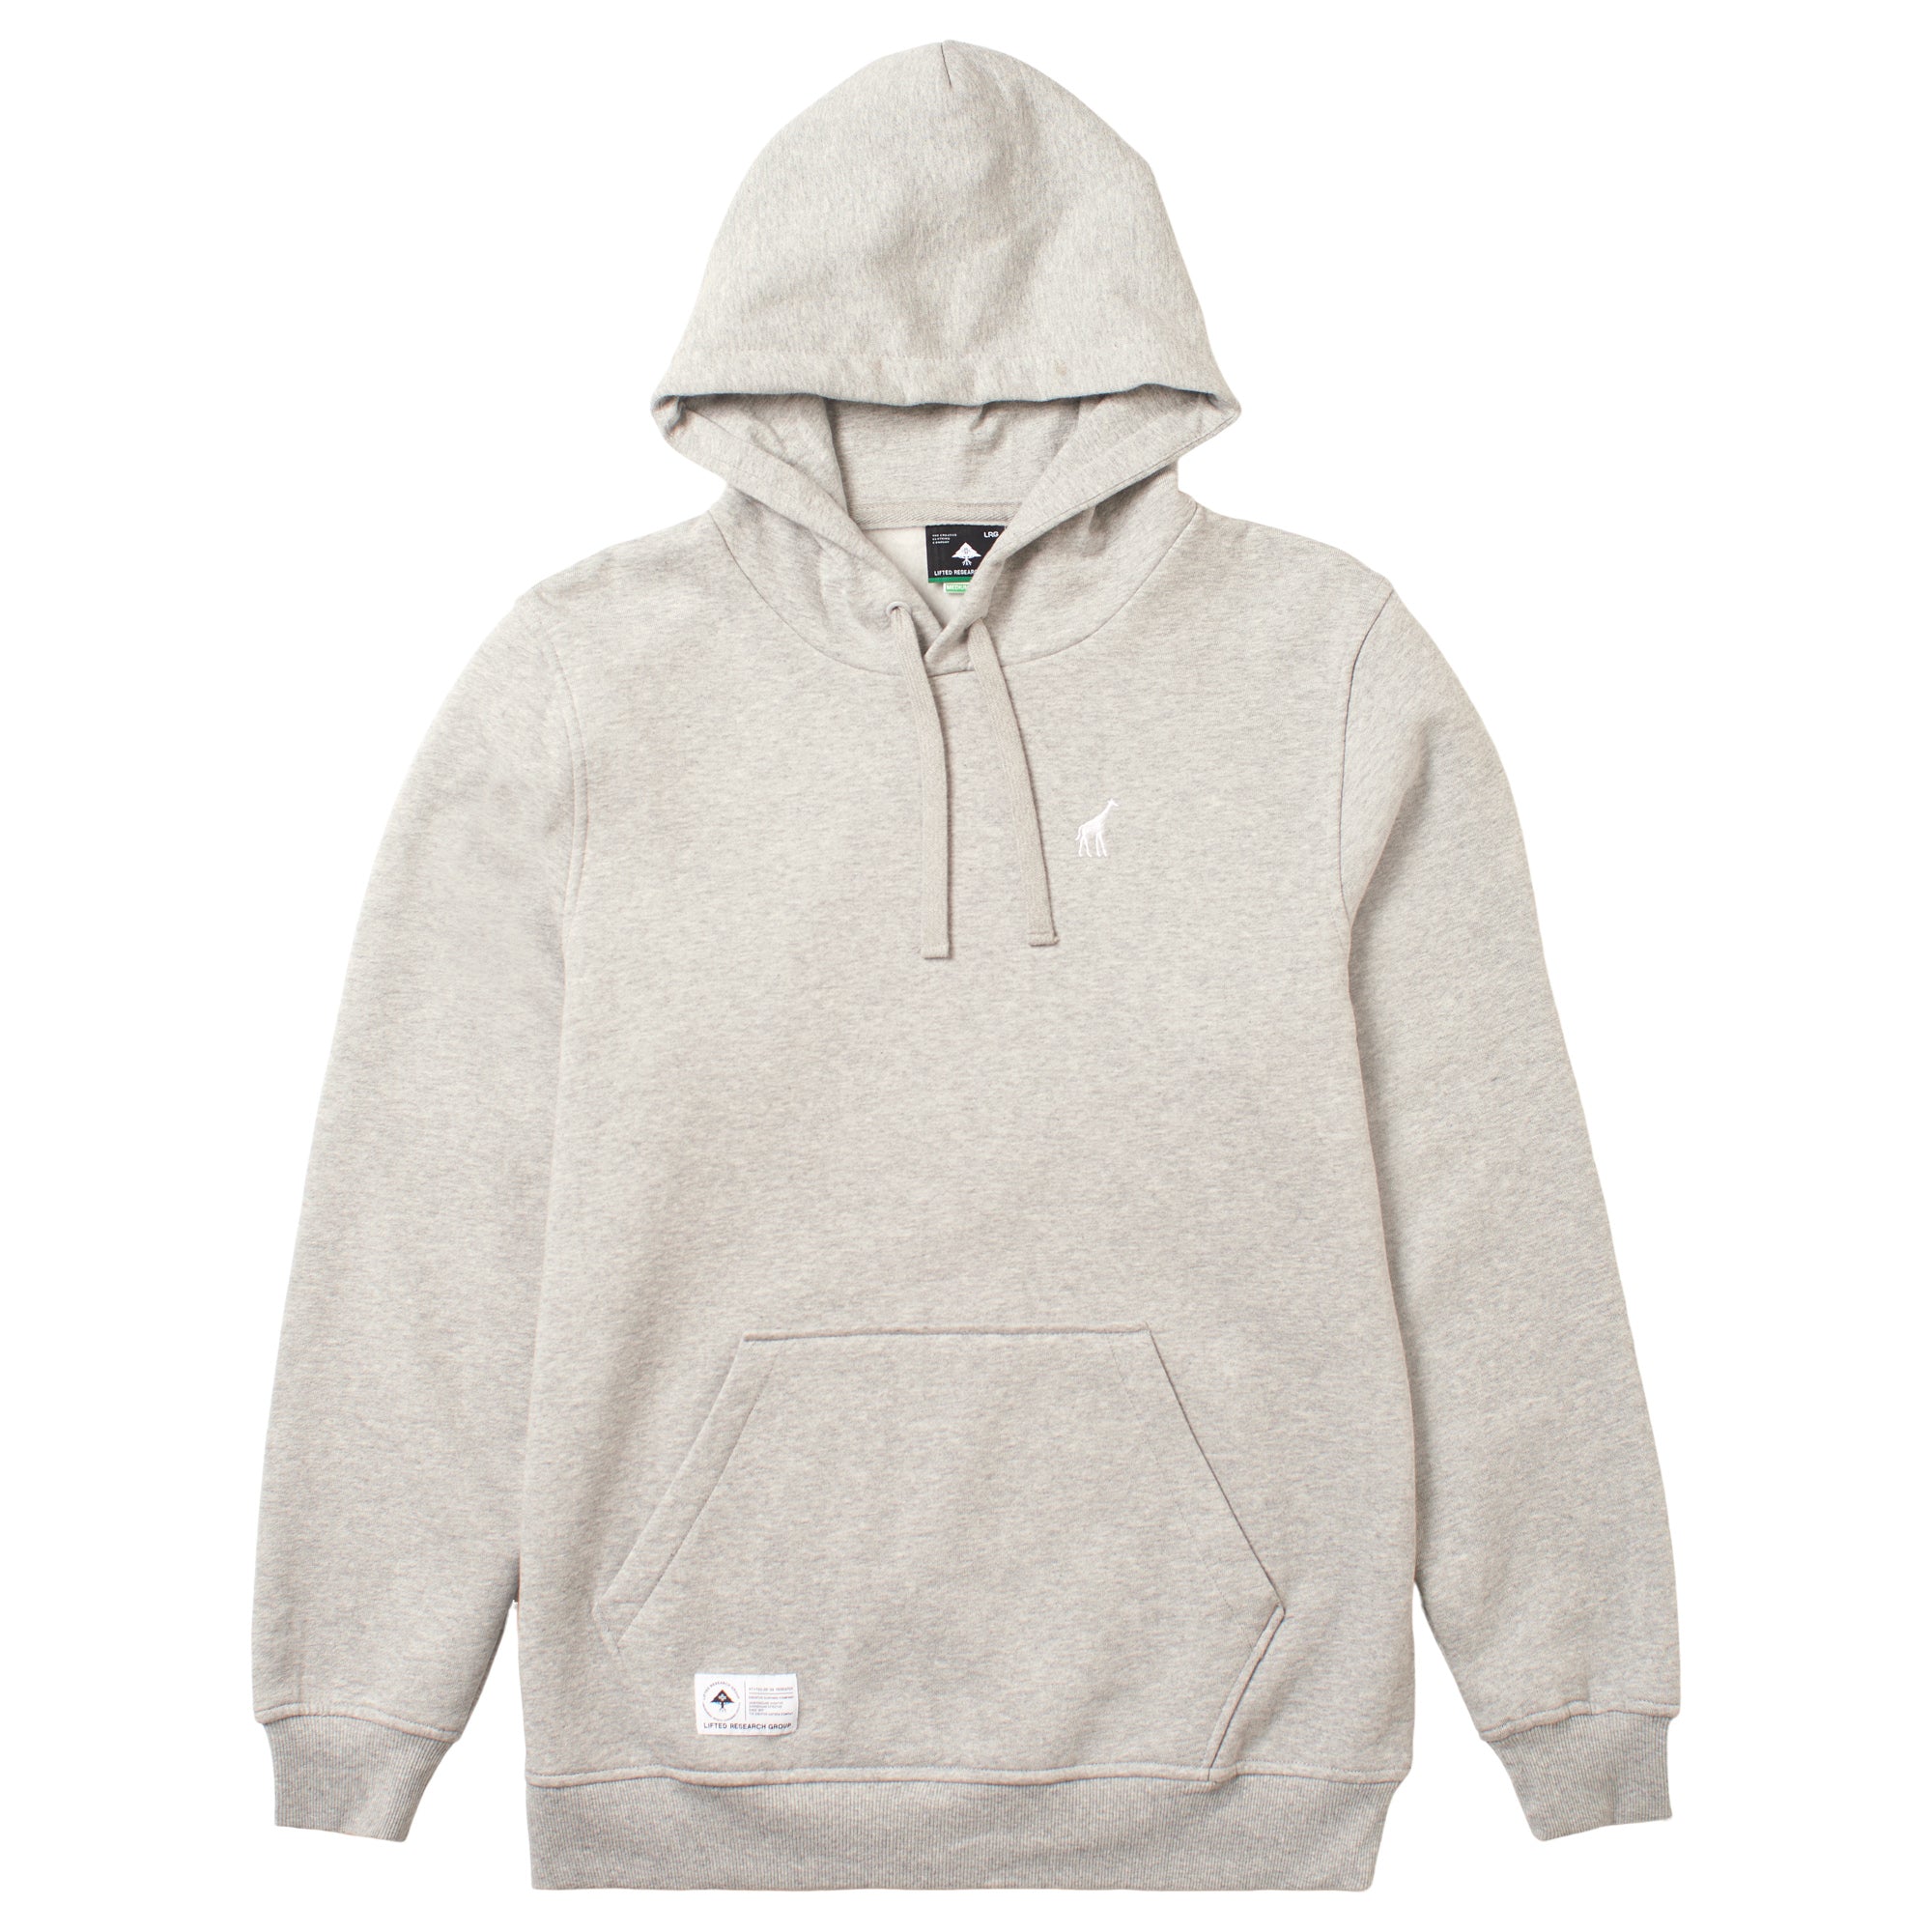 UNIVERSITY PEOPLE PULLOVER JACKET - NATURAL